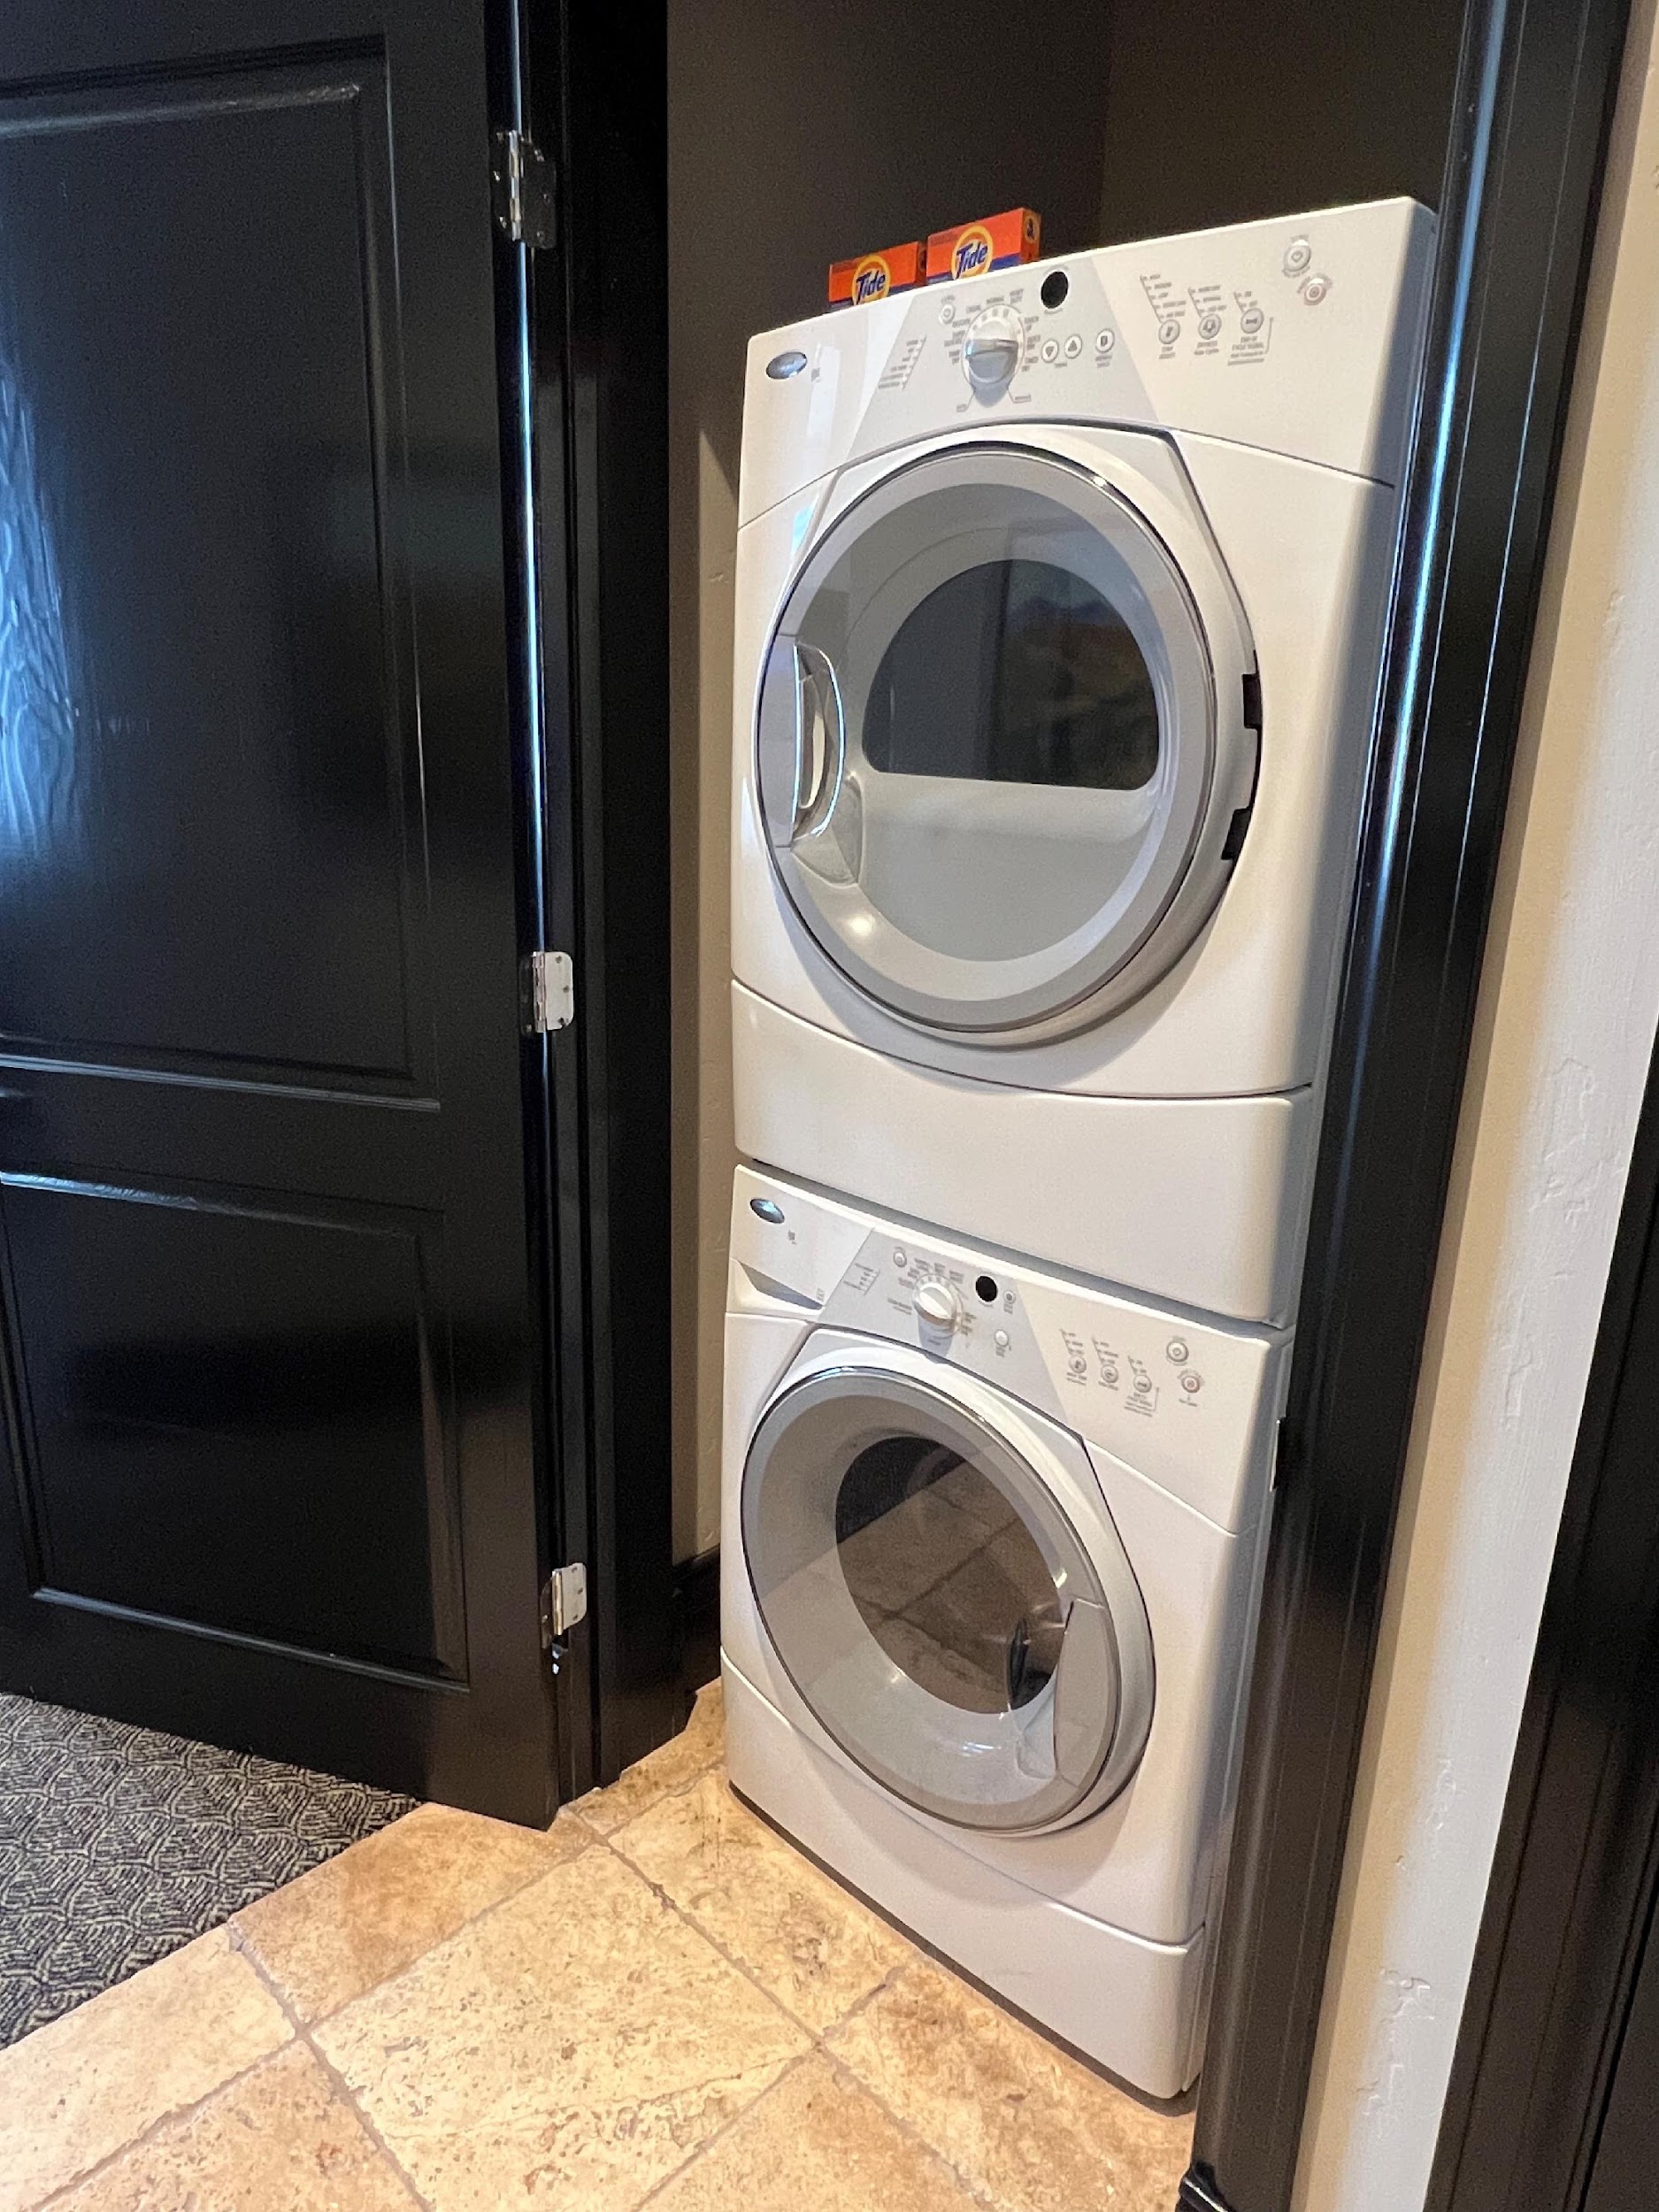 A washing machine in a room Description automatically generated with medium confidence